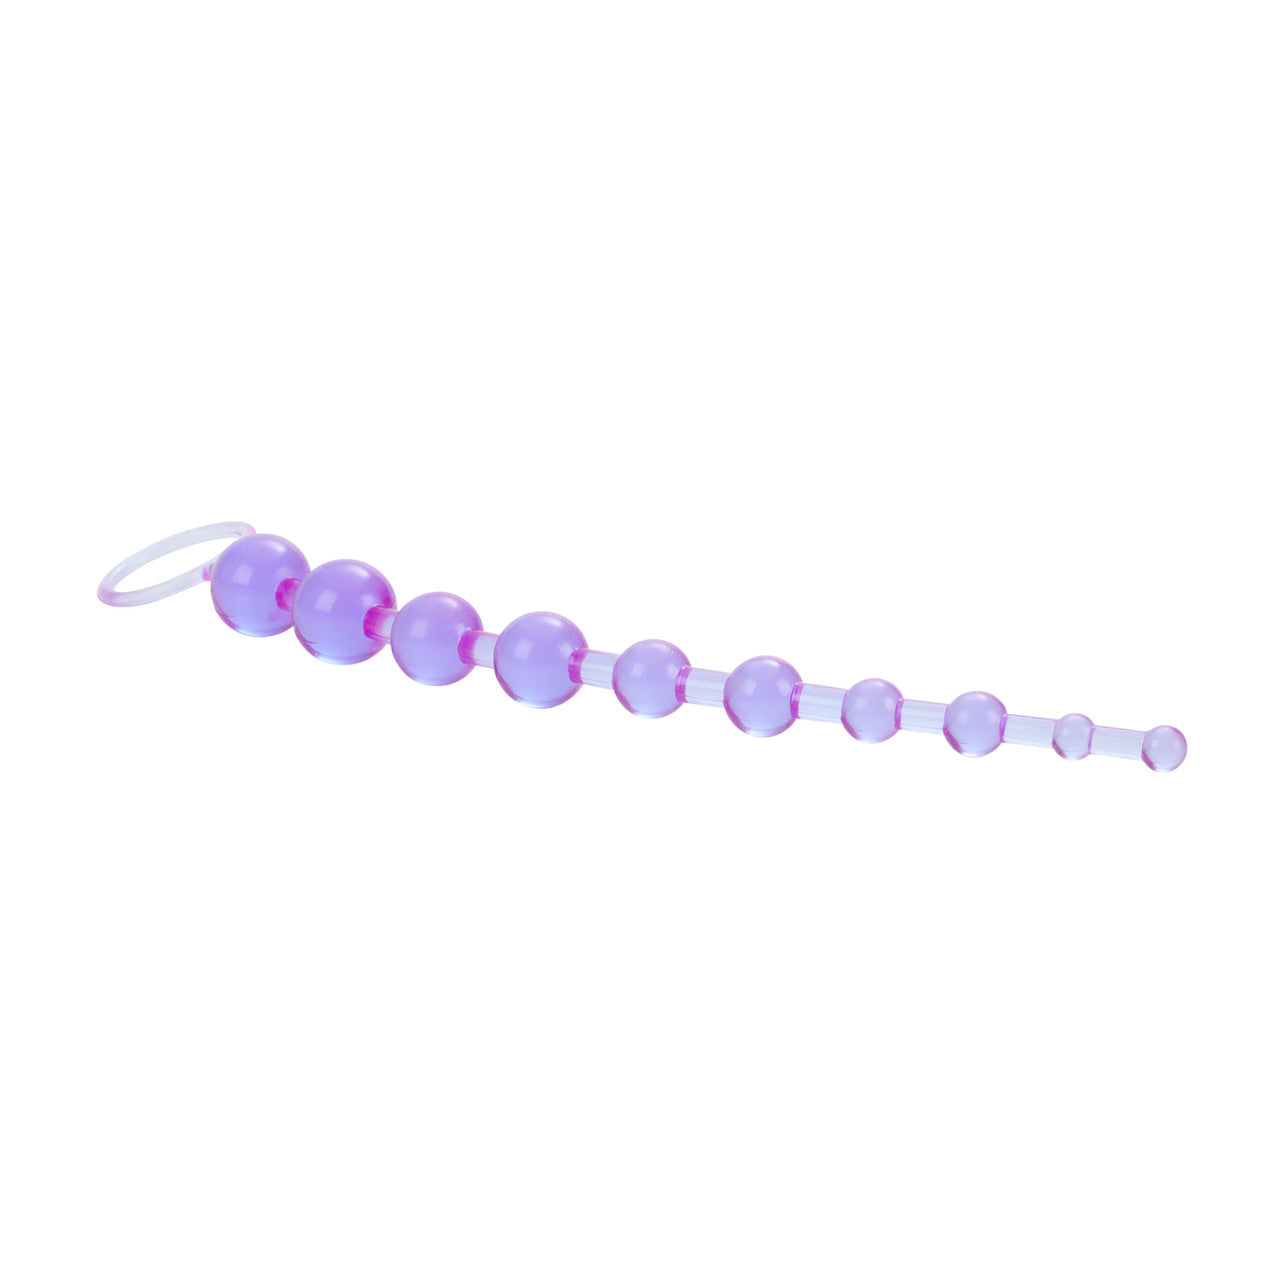 X-10 Anal Beads - Purple - Thorn & Feather